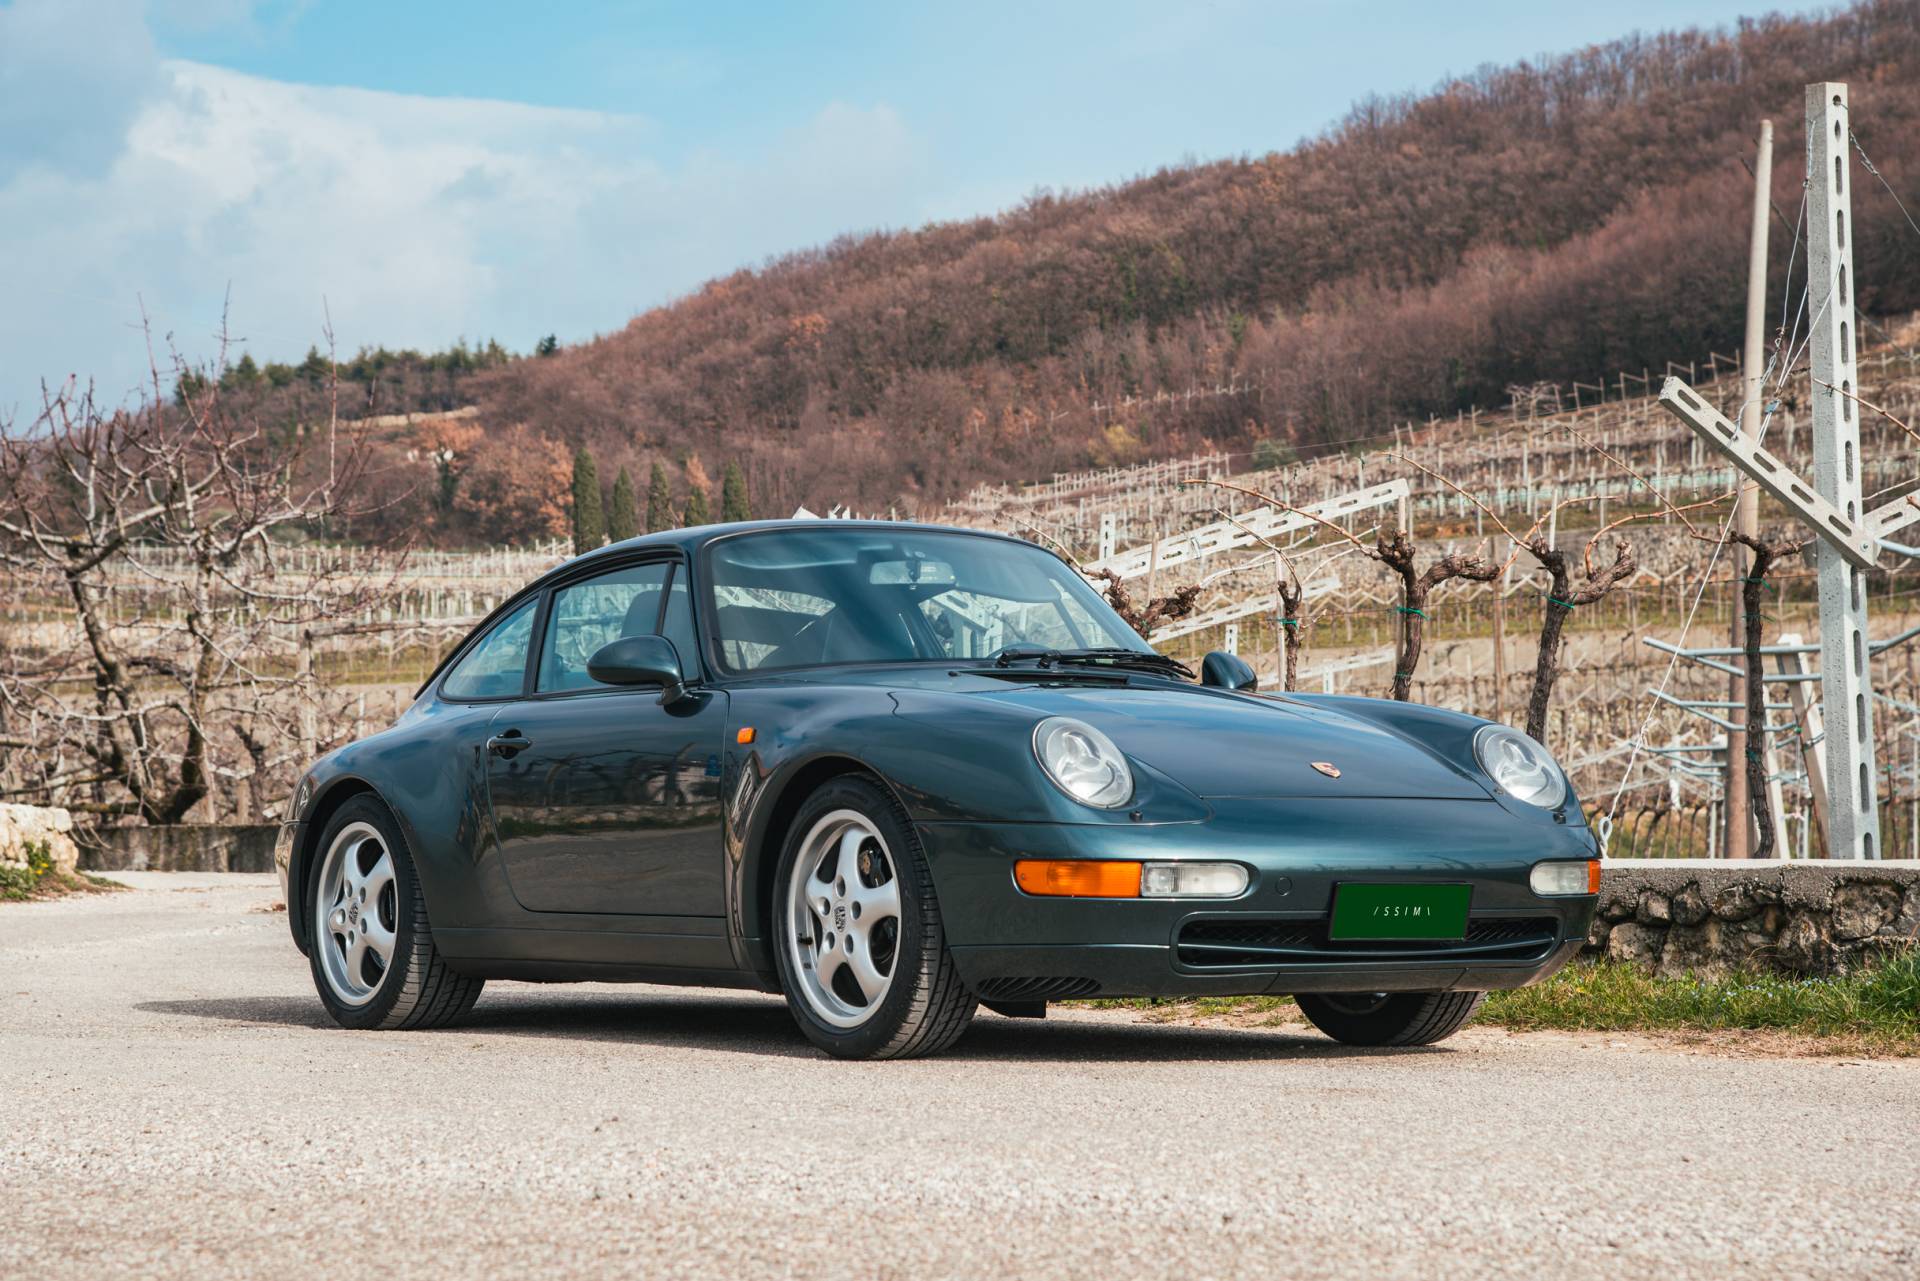 For Sale: Porsche 911 Carrera (1995) offered for GBP 84,441